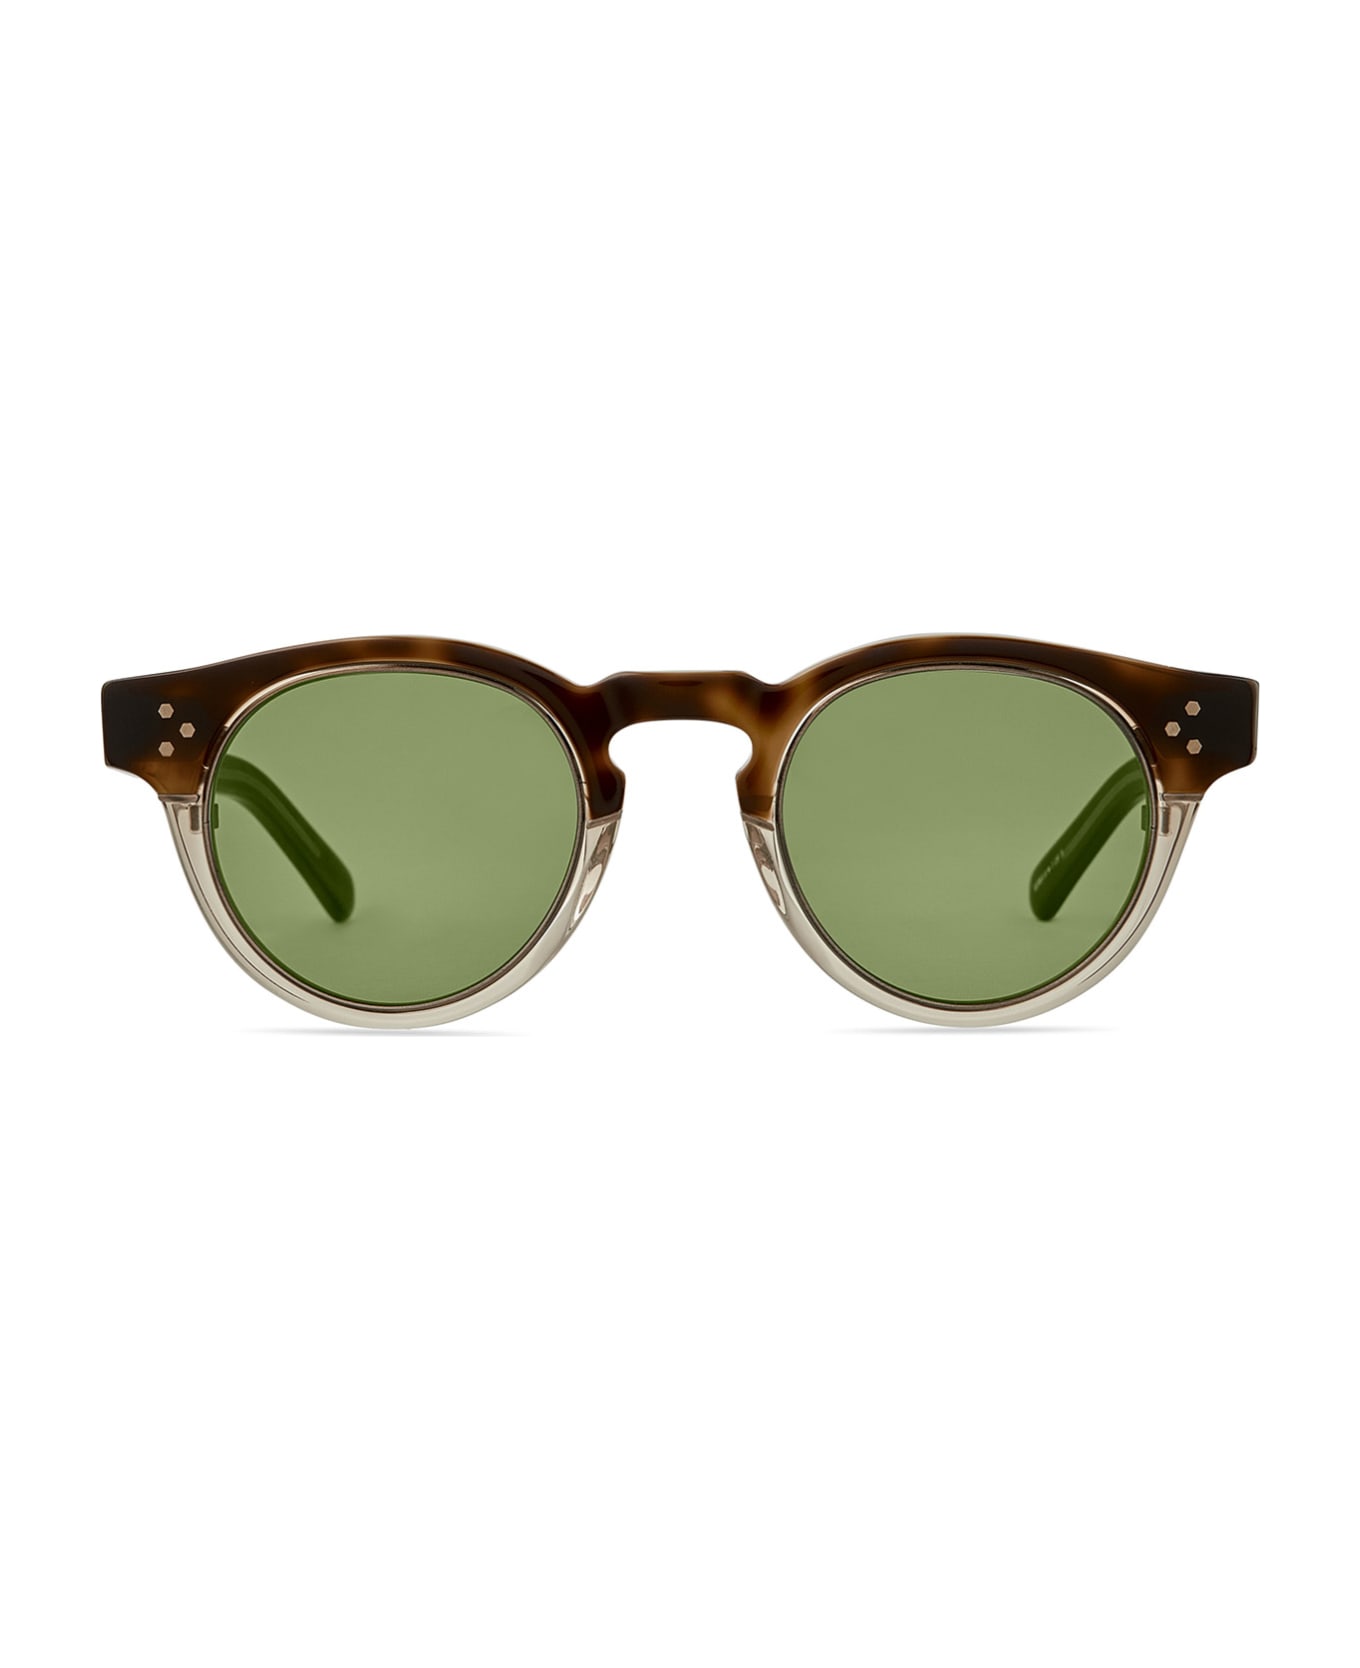 Mr. Leight Kennedy S Honeycomb Laminate-antique Gold/green Sunglasses - Honeycomb Laminate-Antique Gold/Green サングラス